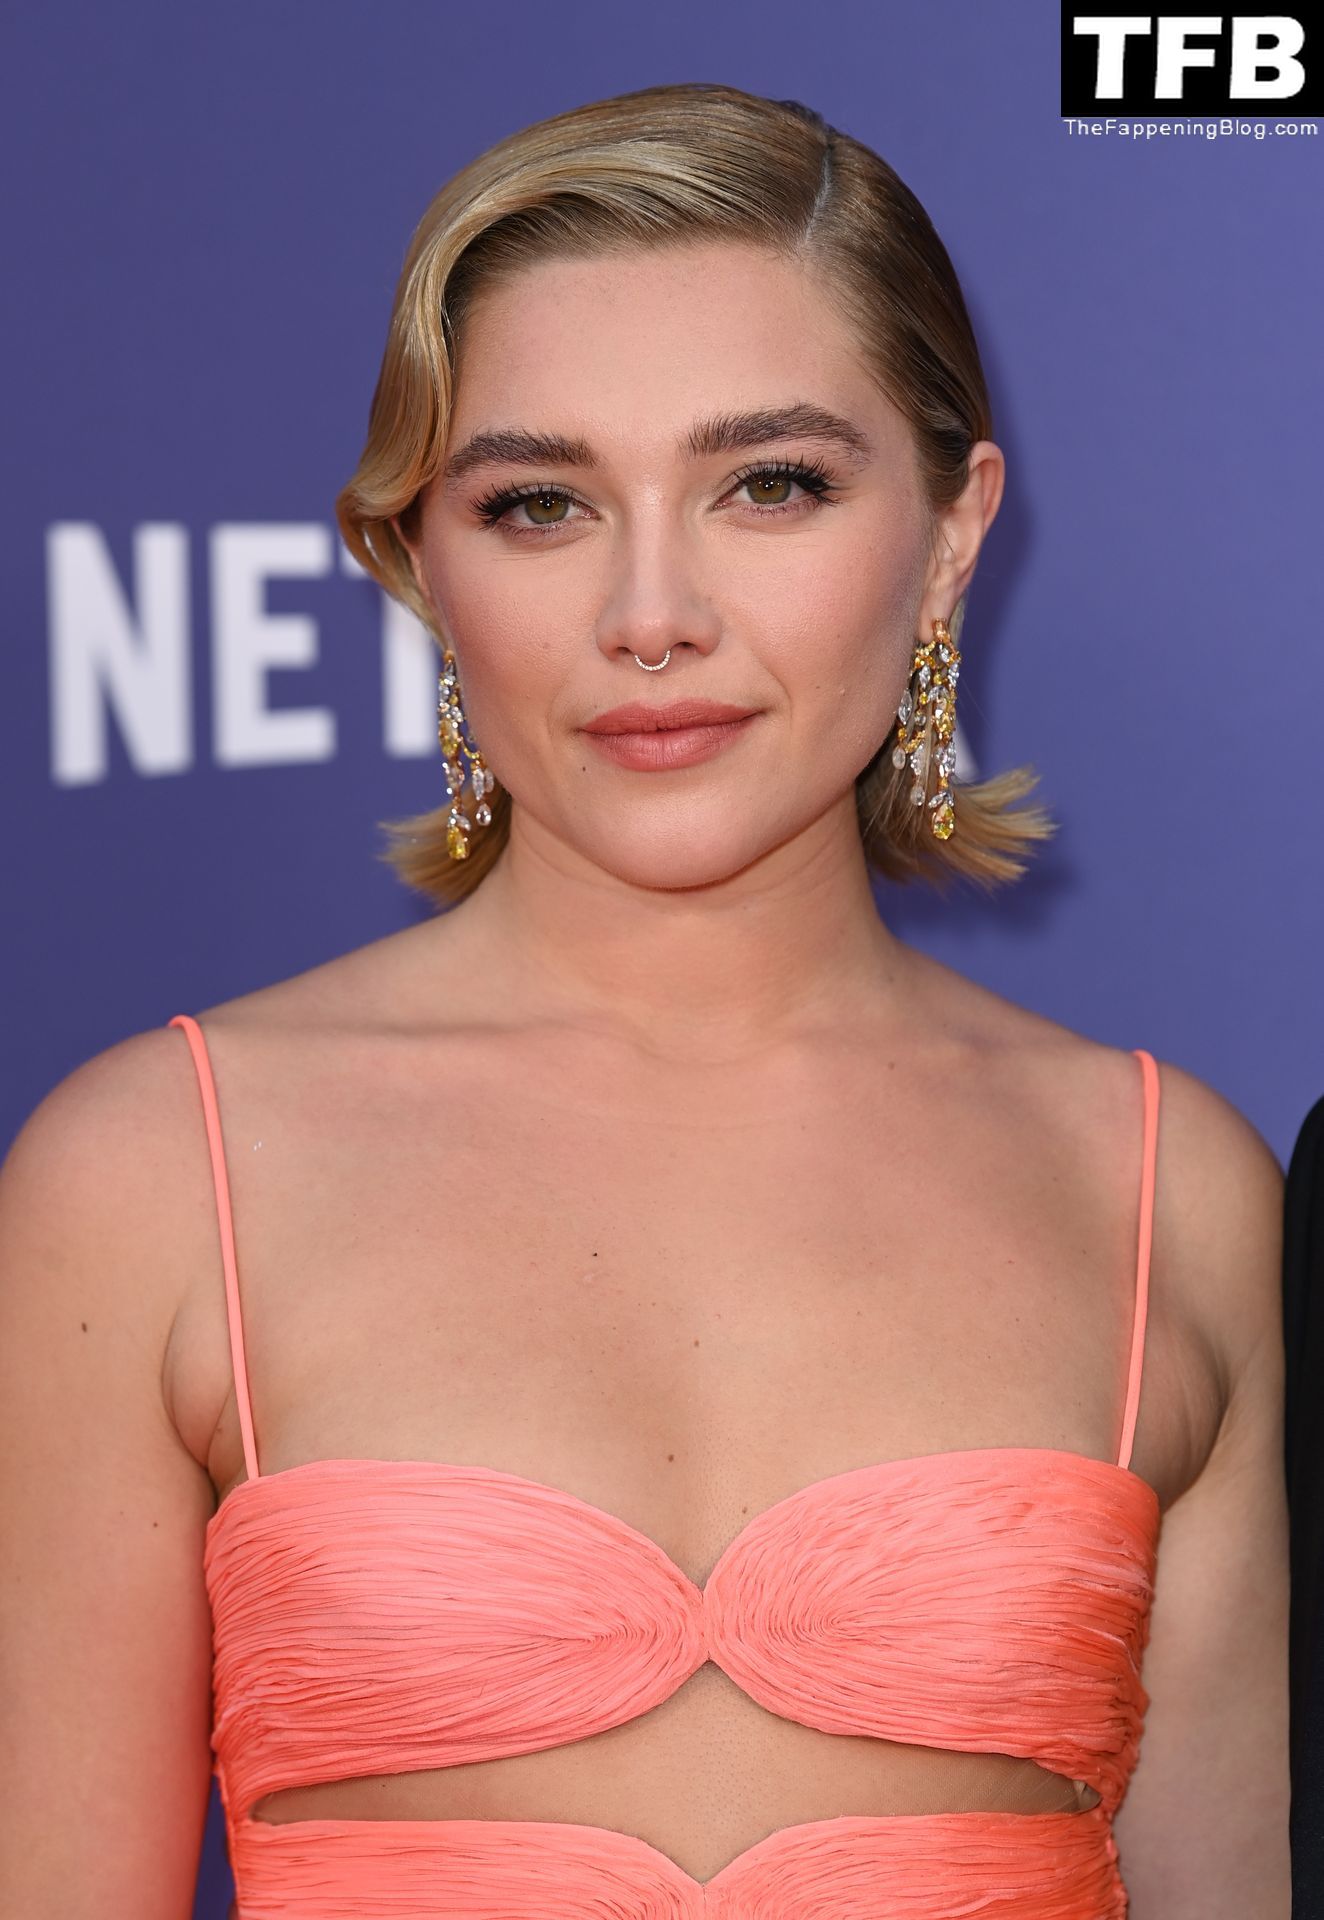 Florence-Pugh-Sexy-The-Fappening-Blog-49-1.jpg